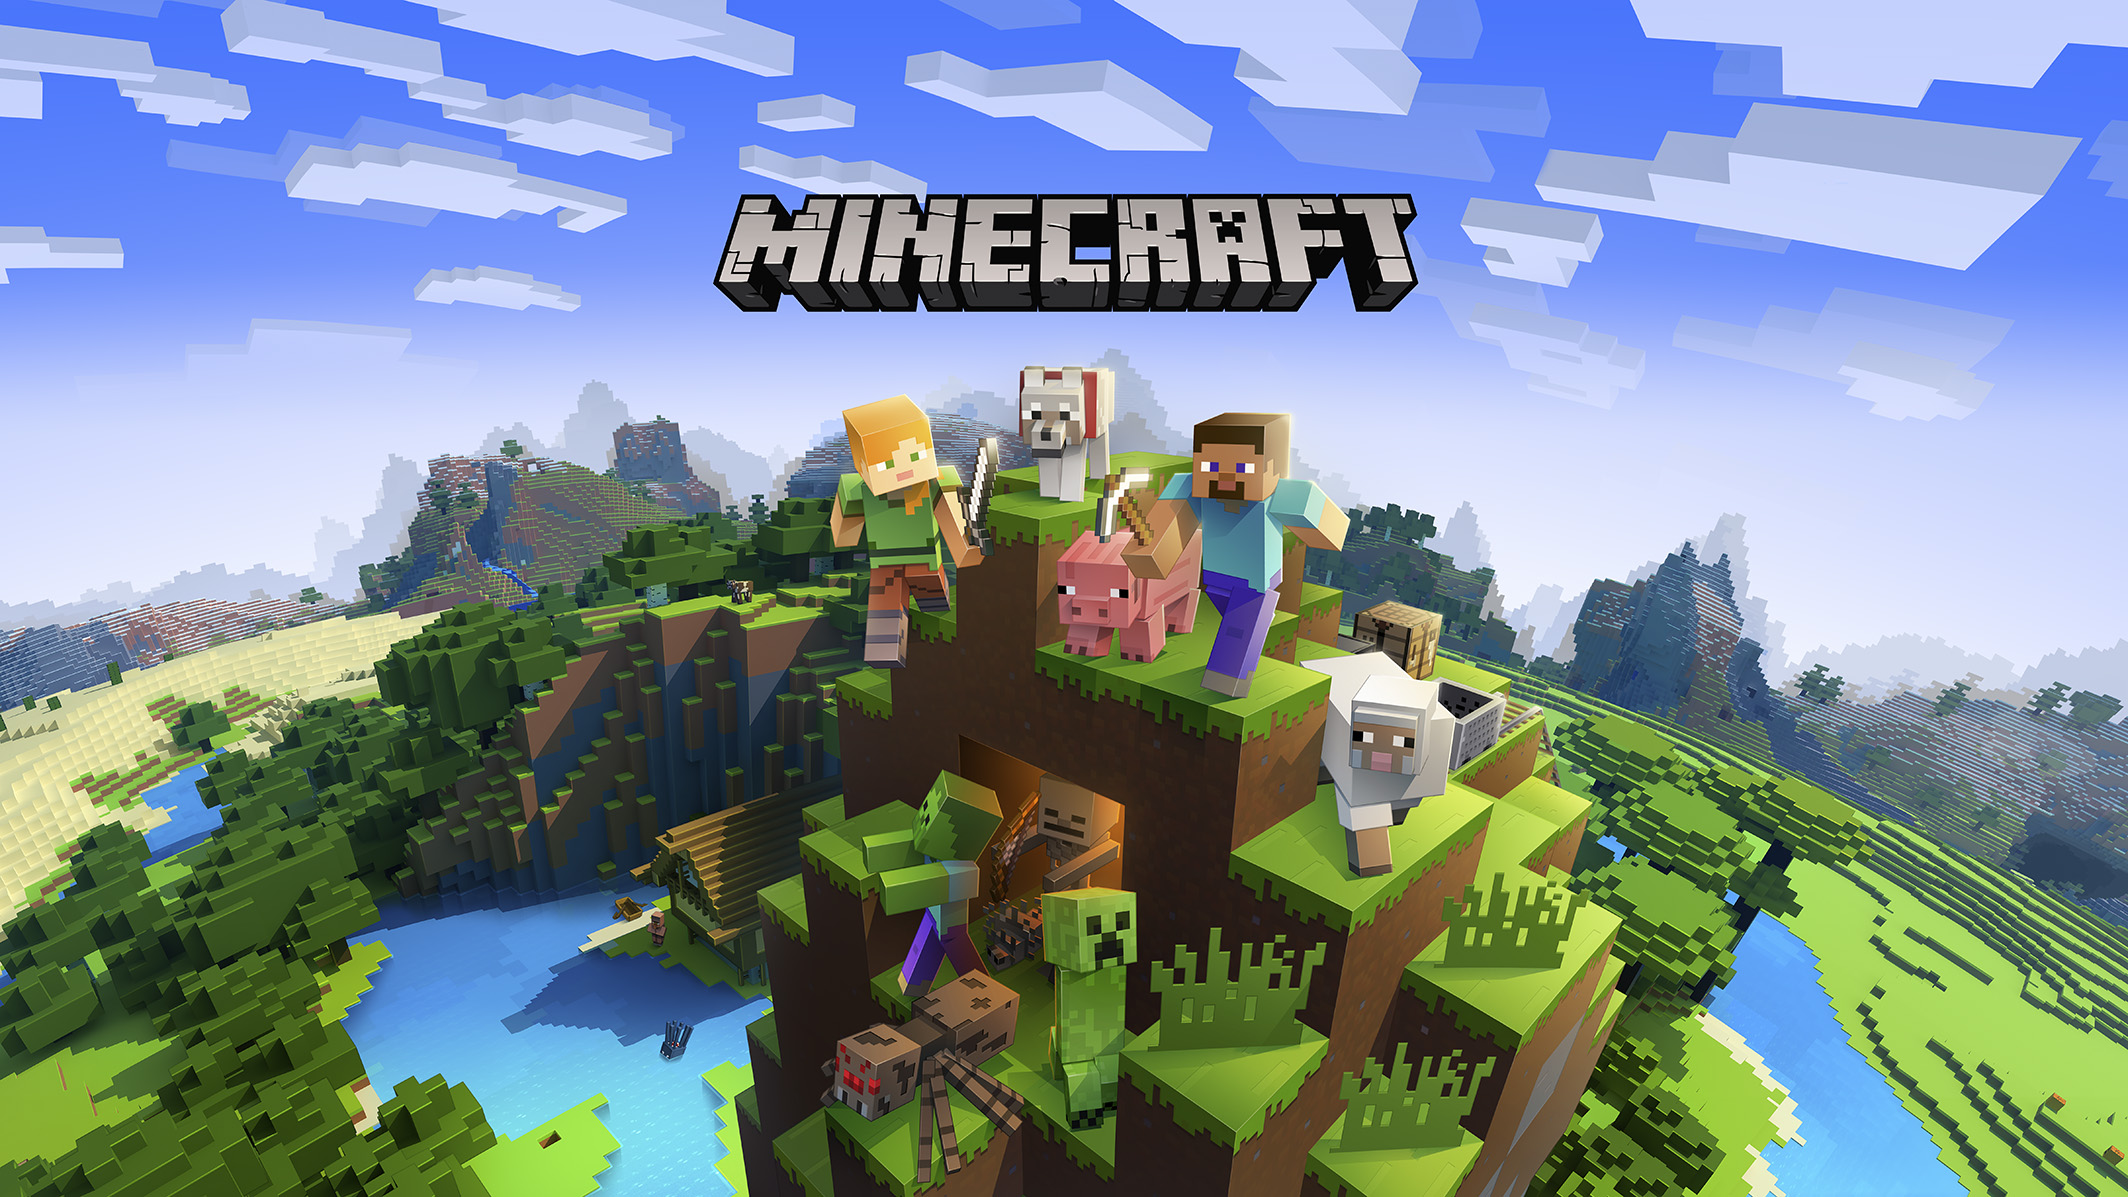 Minecraft's 'Better Together' Beta lets you play with friends across  Windows 10 and Android devices